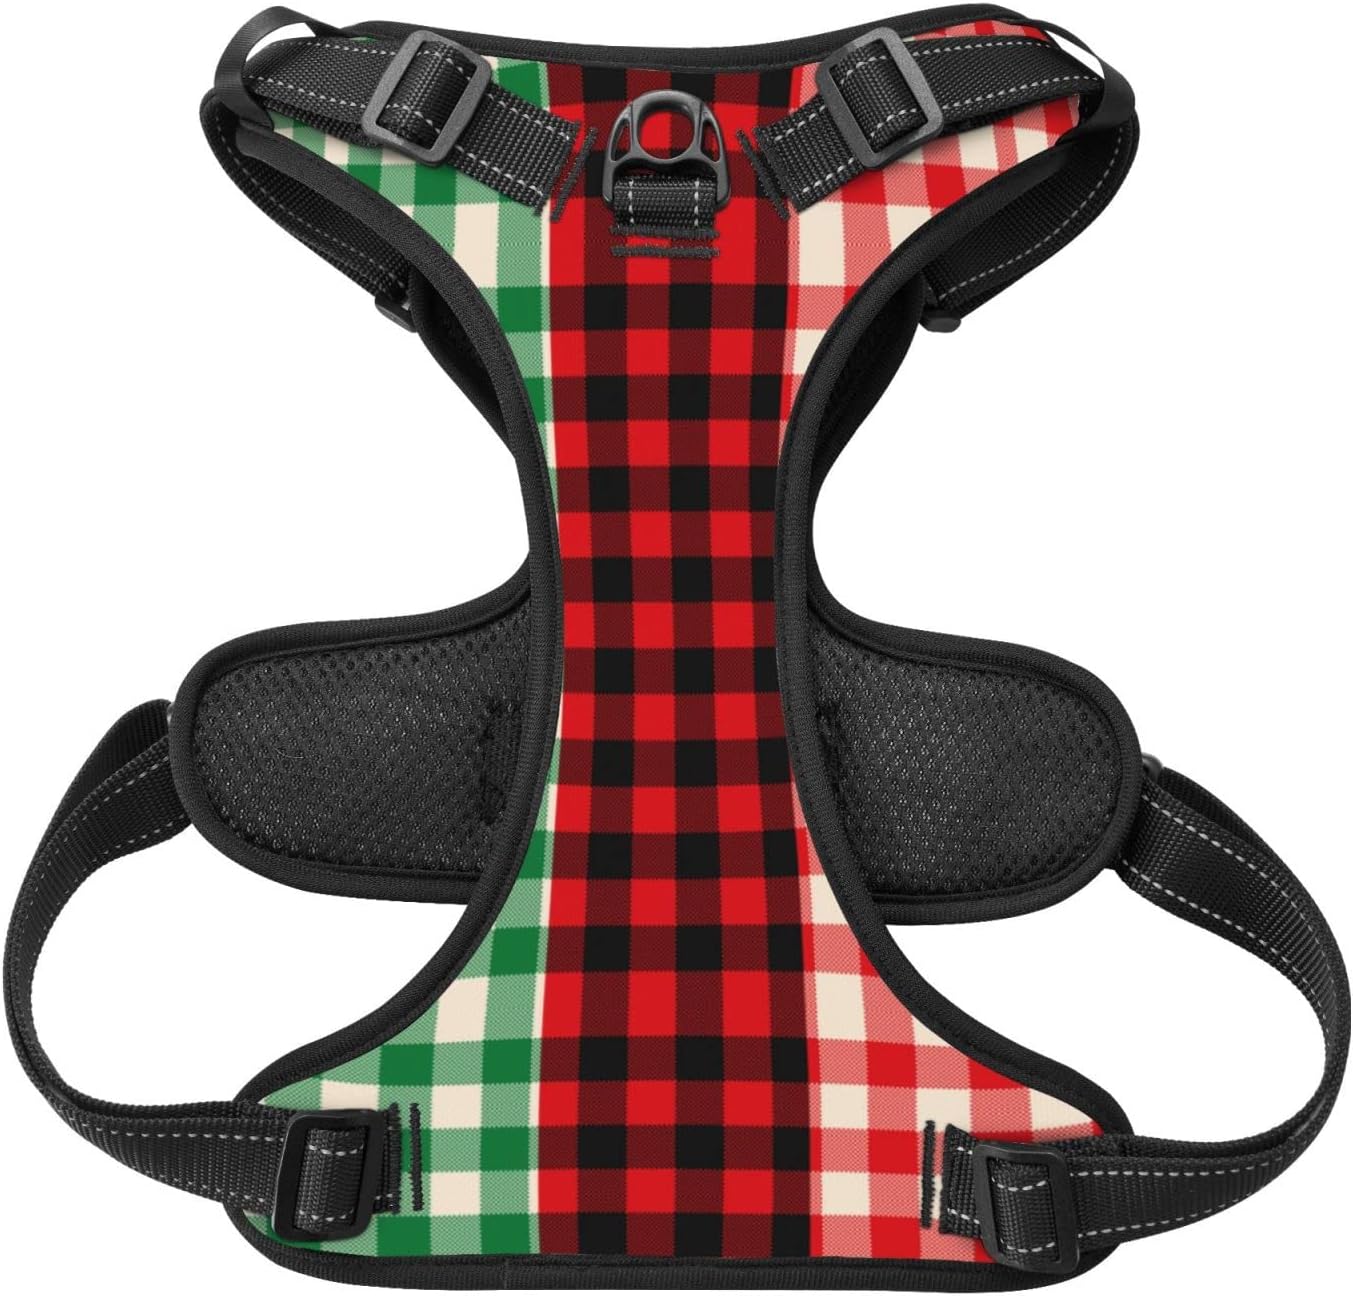 Custom No Pull Dog Harness, Personalized Christmas Green Red Plaid Dog Vest with Pet Name Phone Number, Customized Adjustable Reflective Pet Harness for Large Medium Small Dogs Cats Outdoor Walking